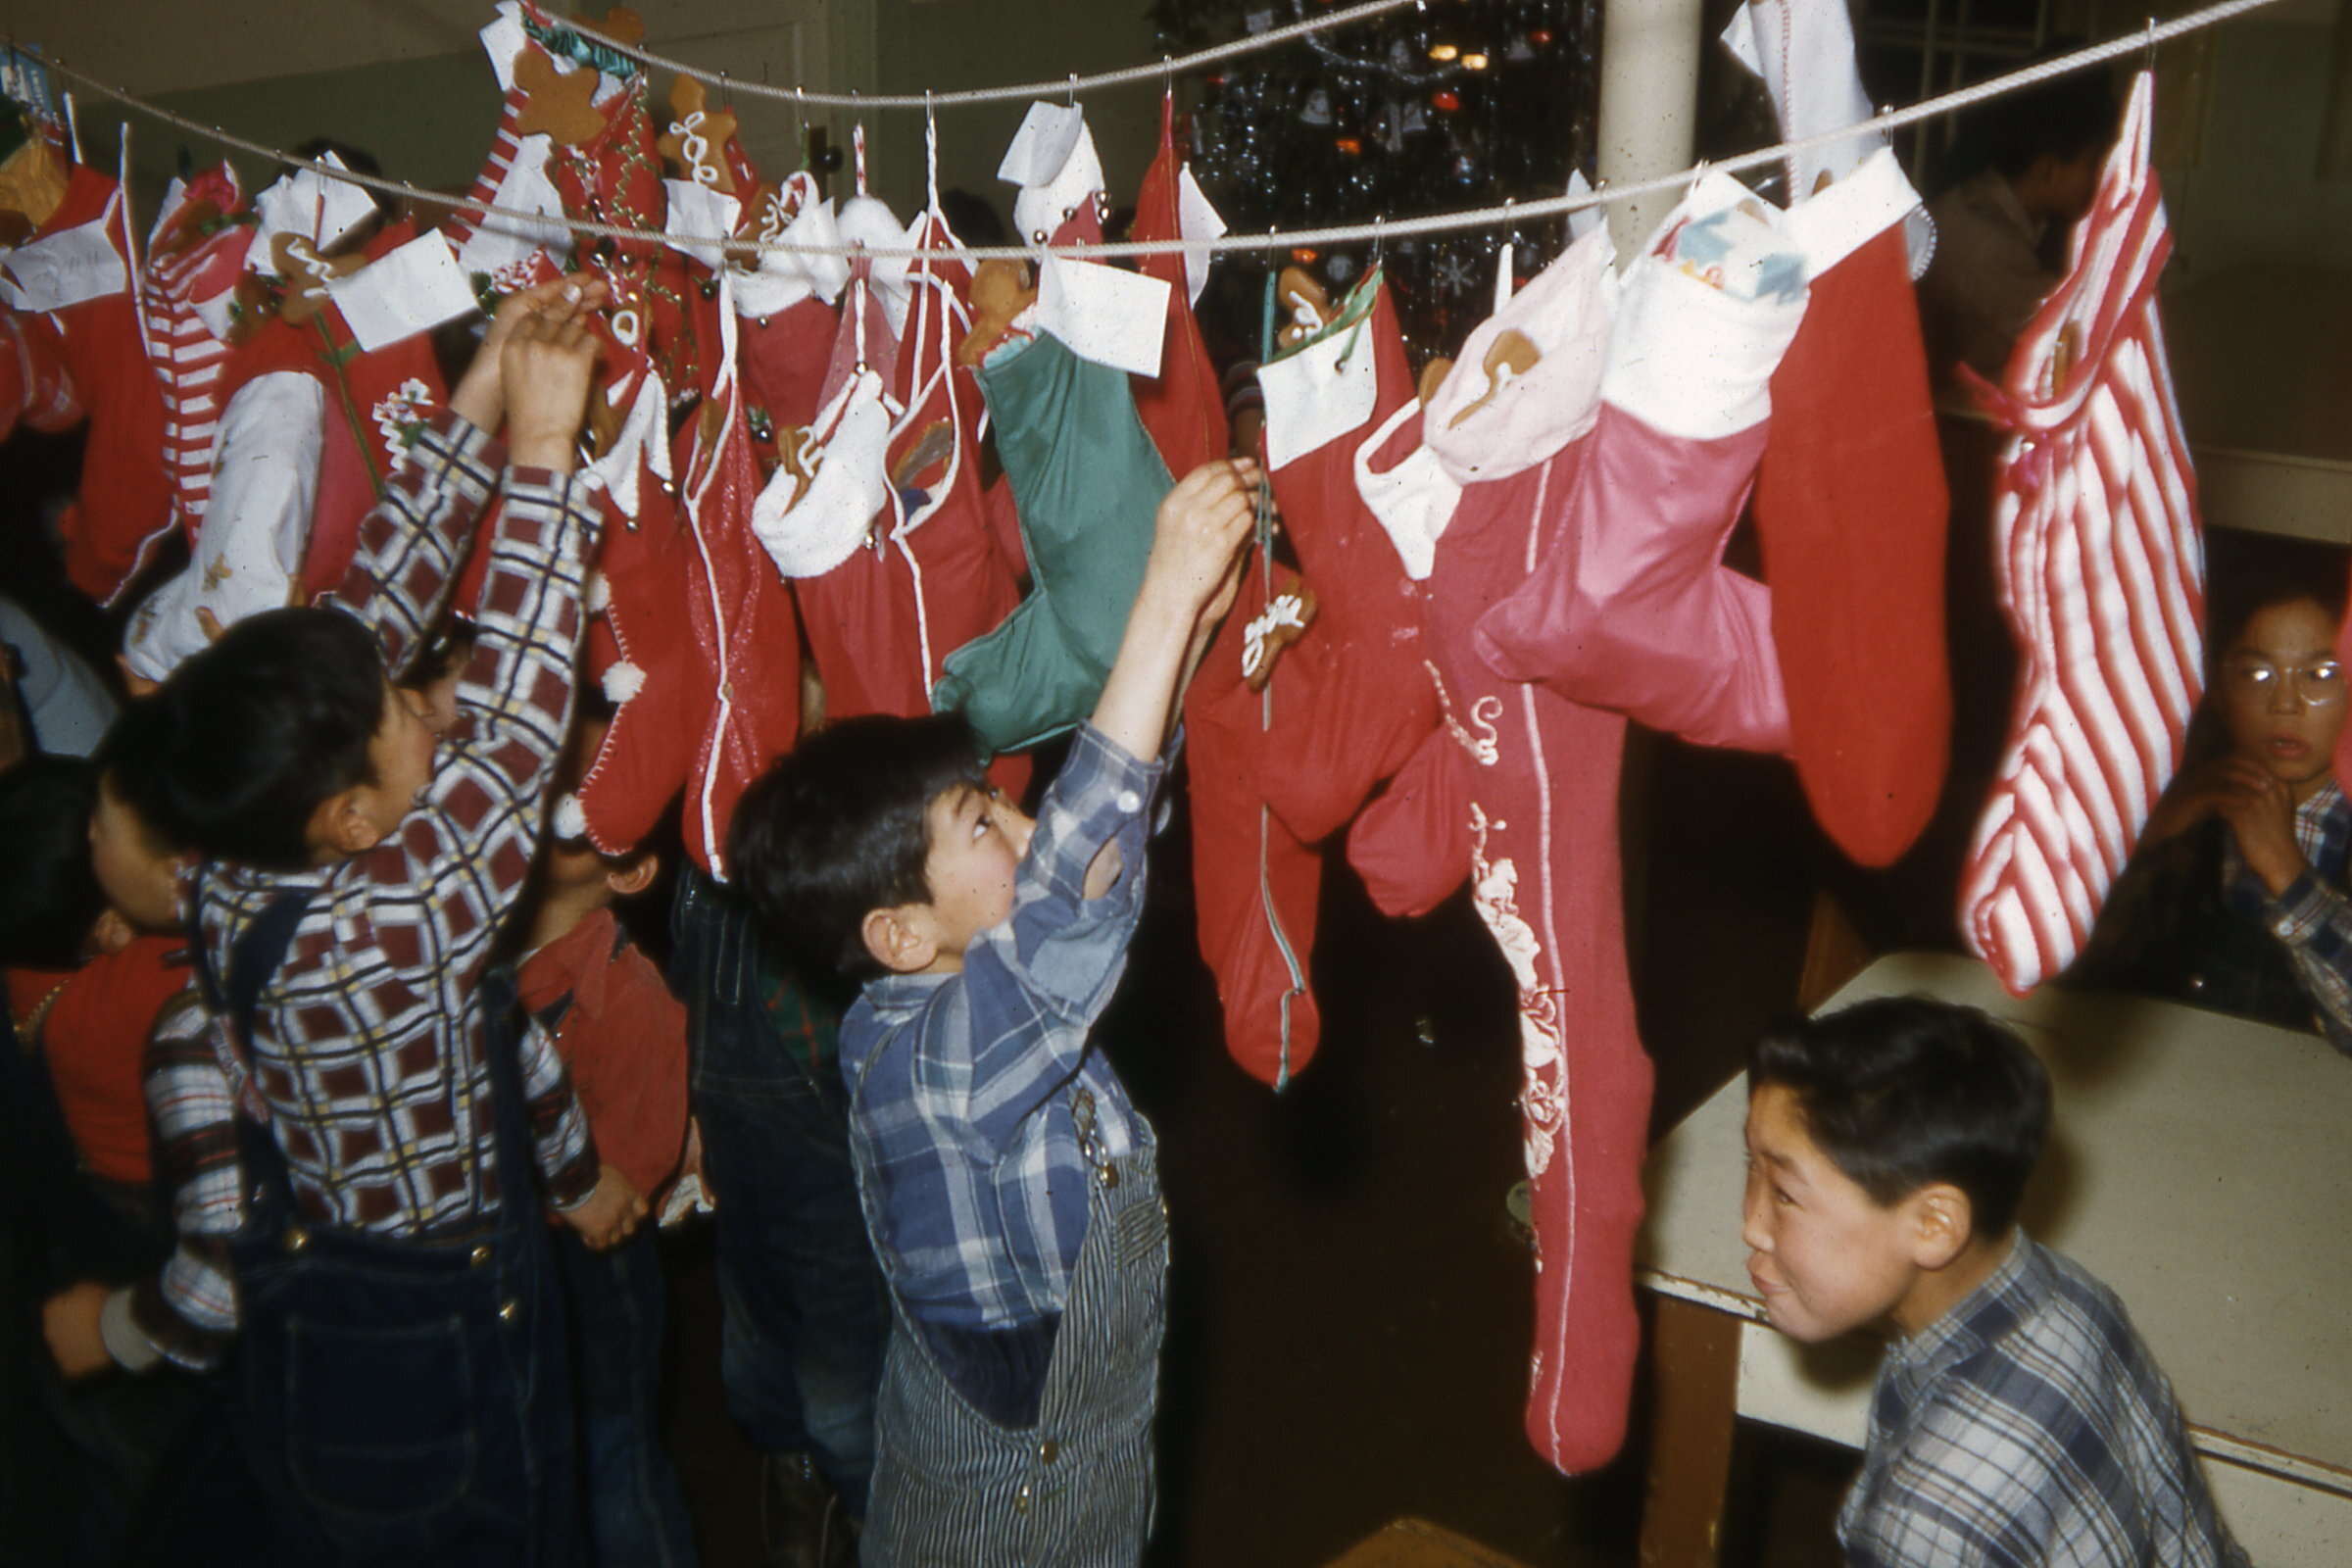  1955 Taking down Christmas stockings. Photo on loan from the Henkelman Archives.    